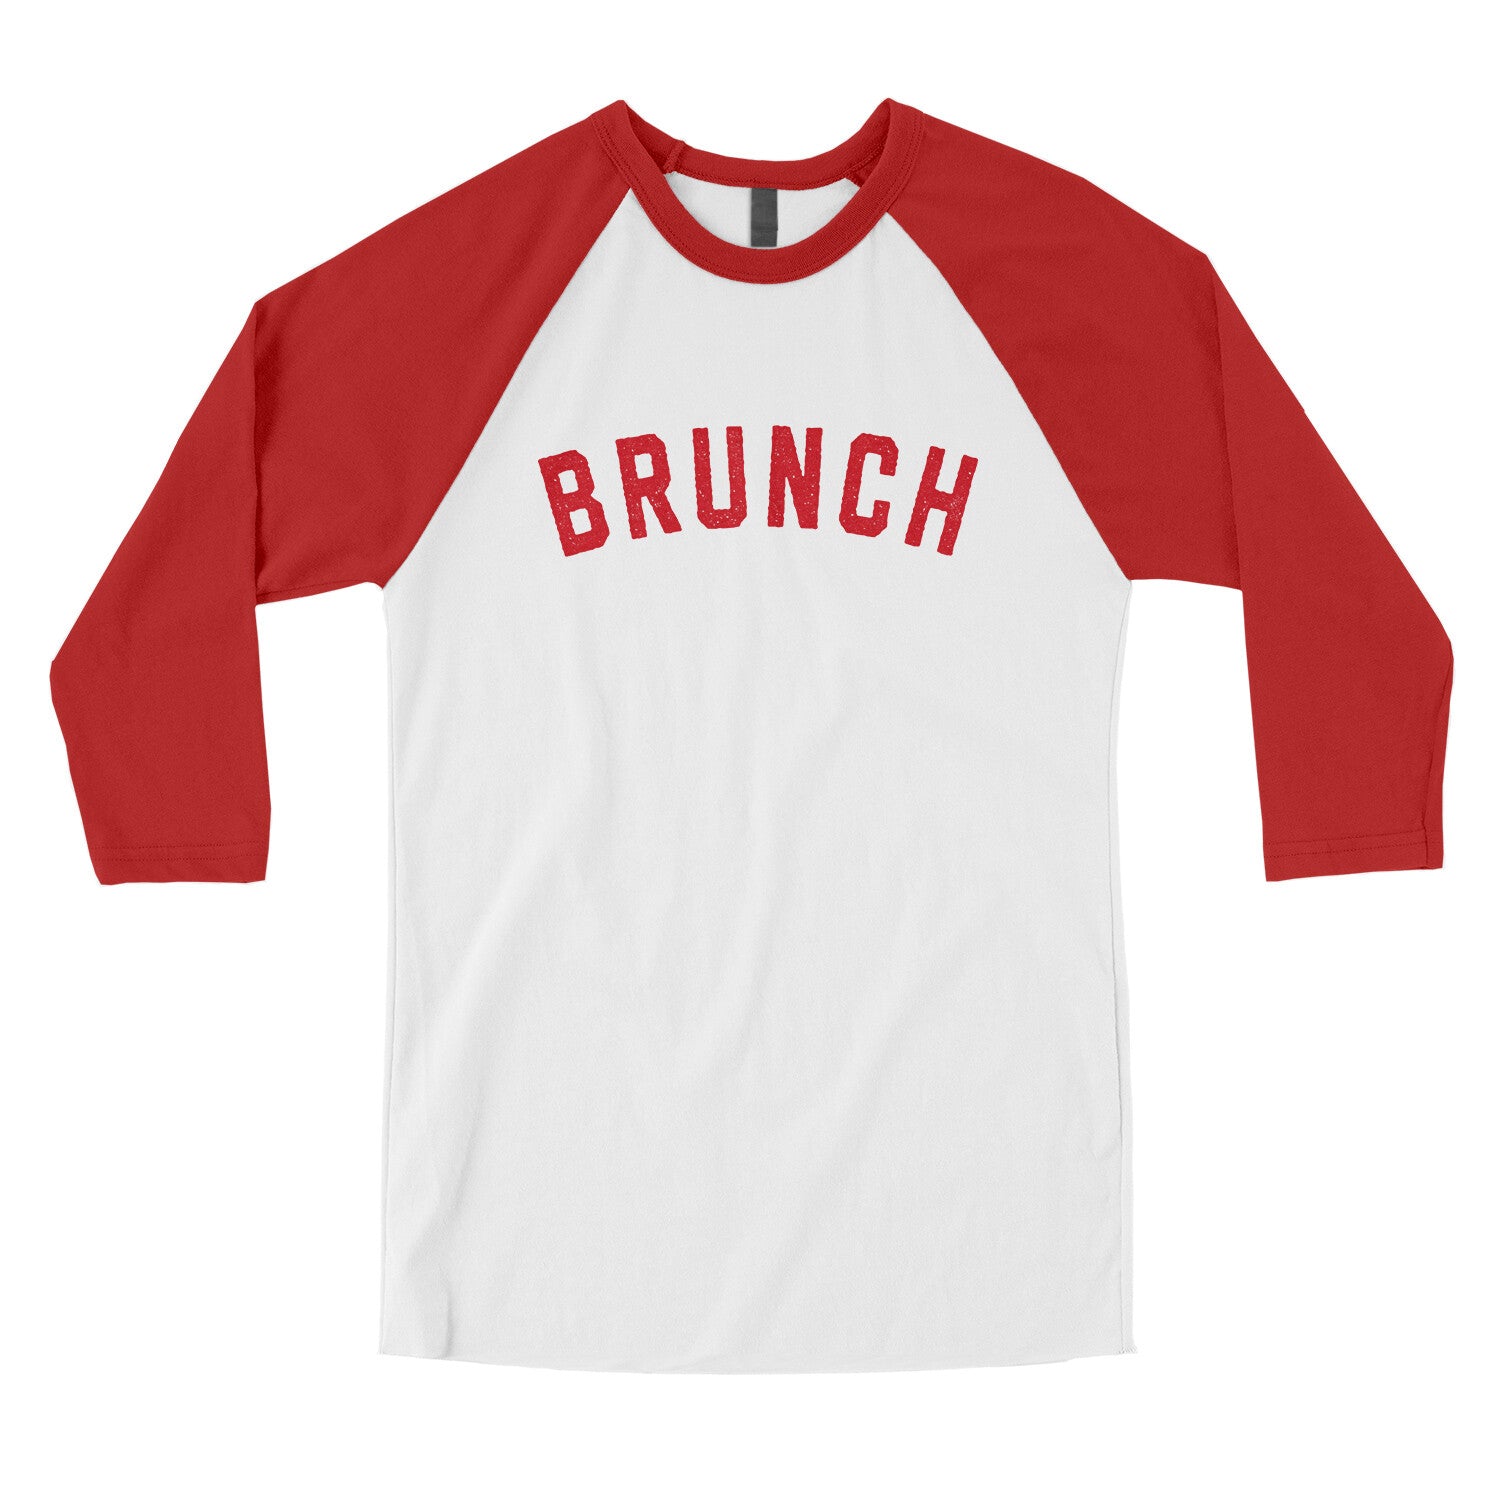 Brunch in White with Red Color